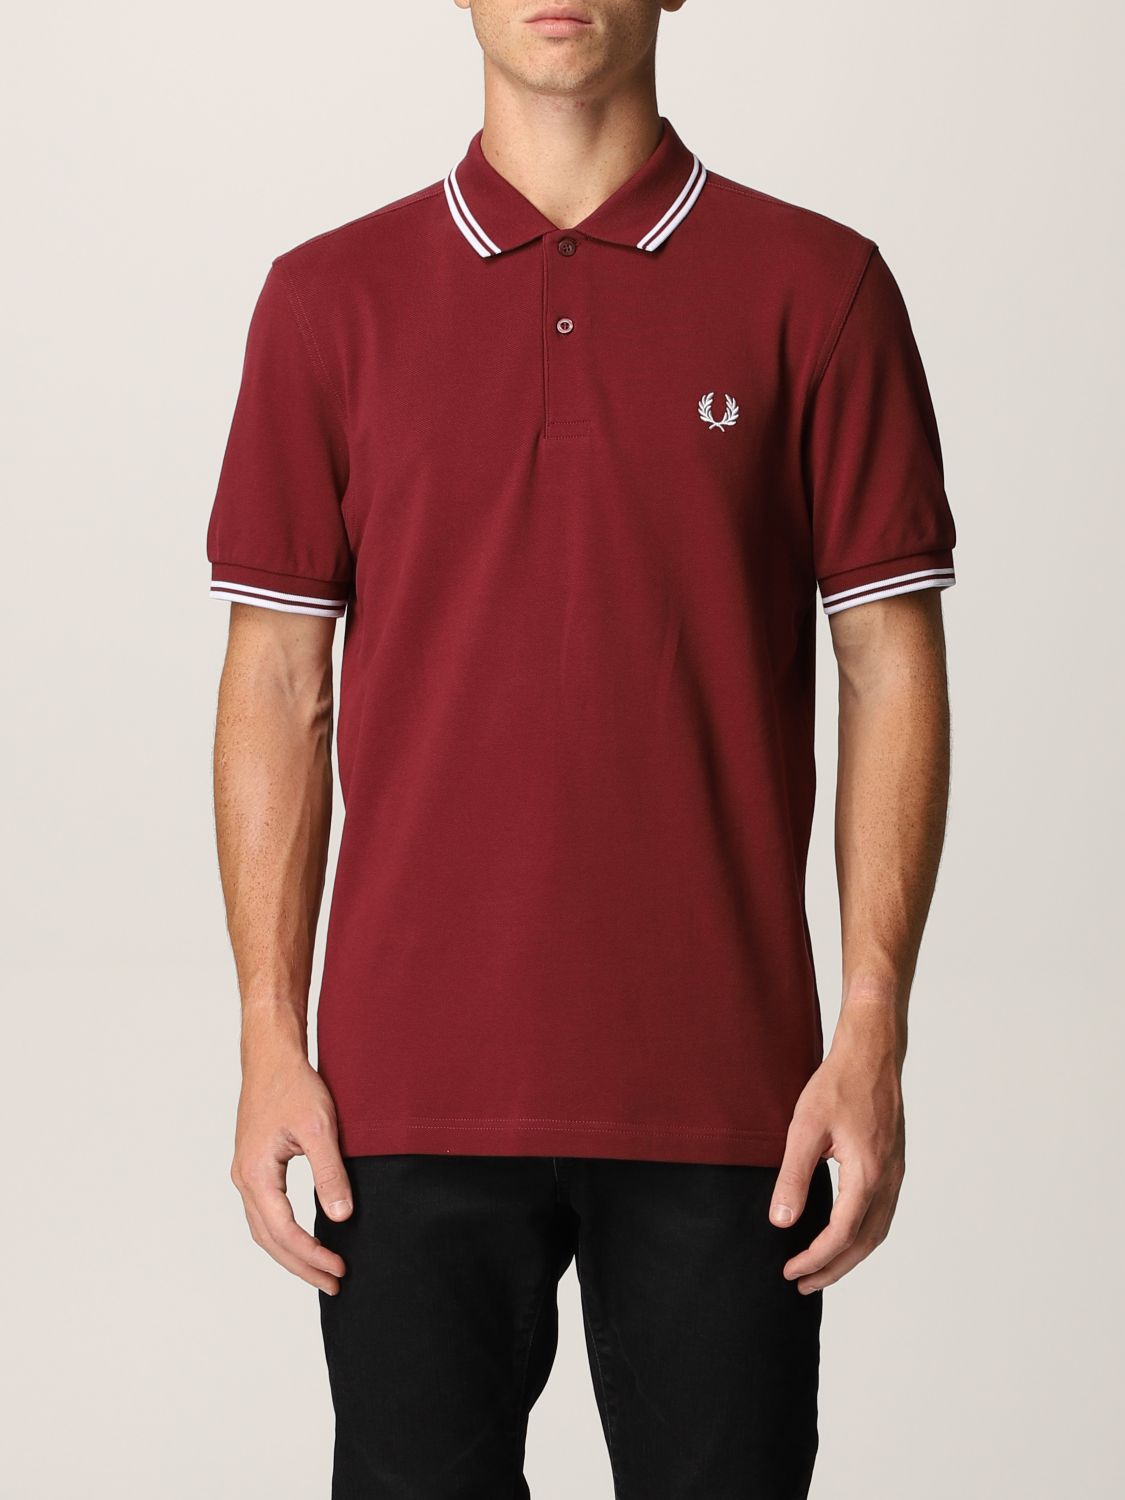 Weven schade ontwikkeling FRED PERRY: polo shirt in piqué cotton - Wine | Fred Perry polo shirt M3600  online on GIGLIO.COM